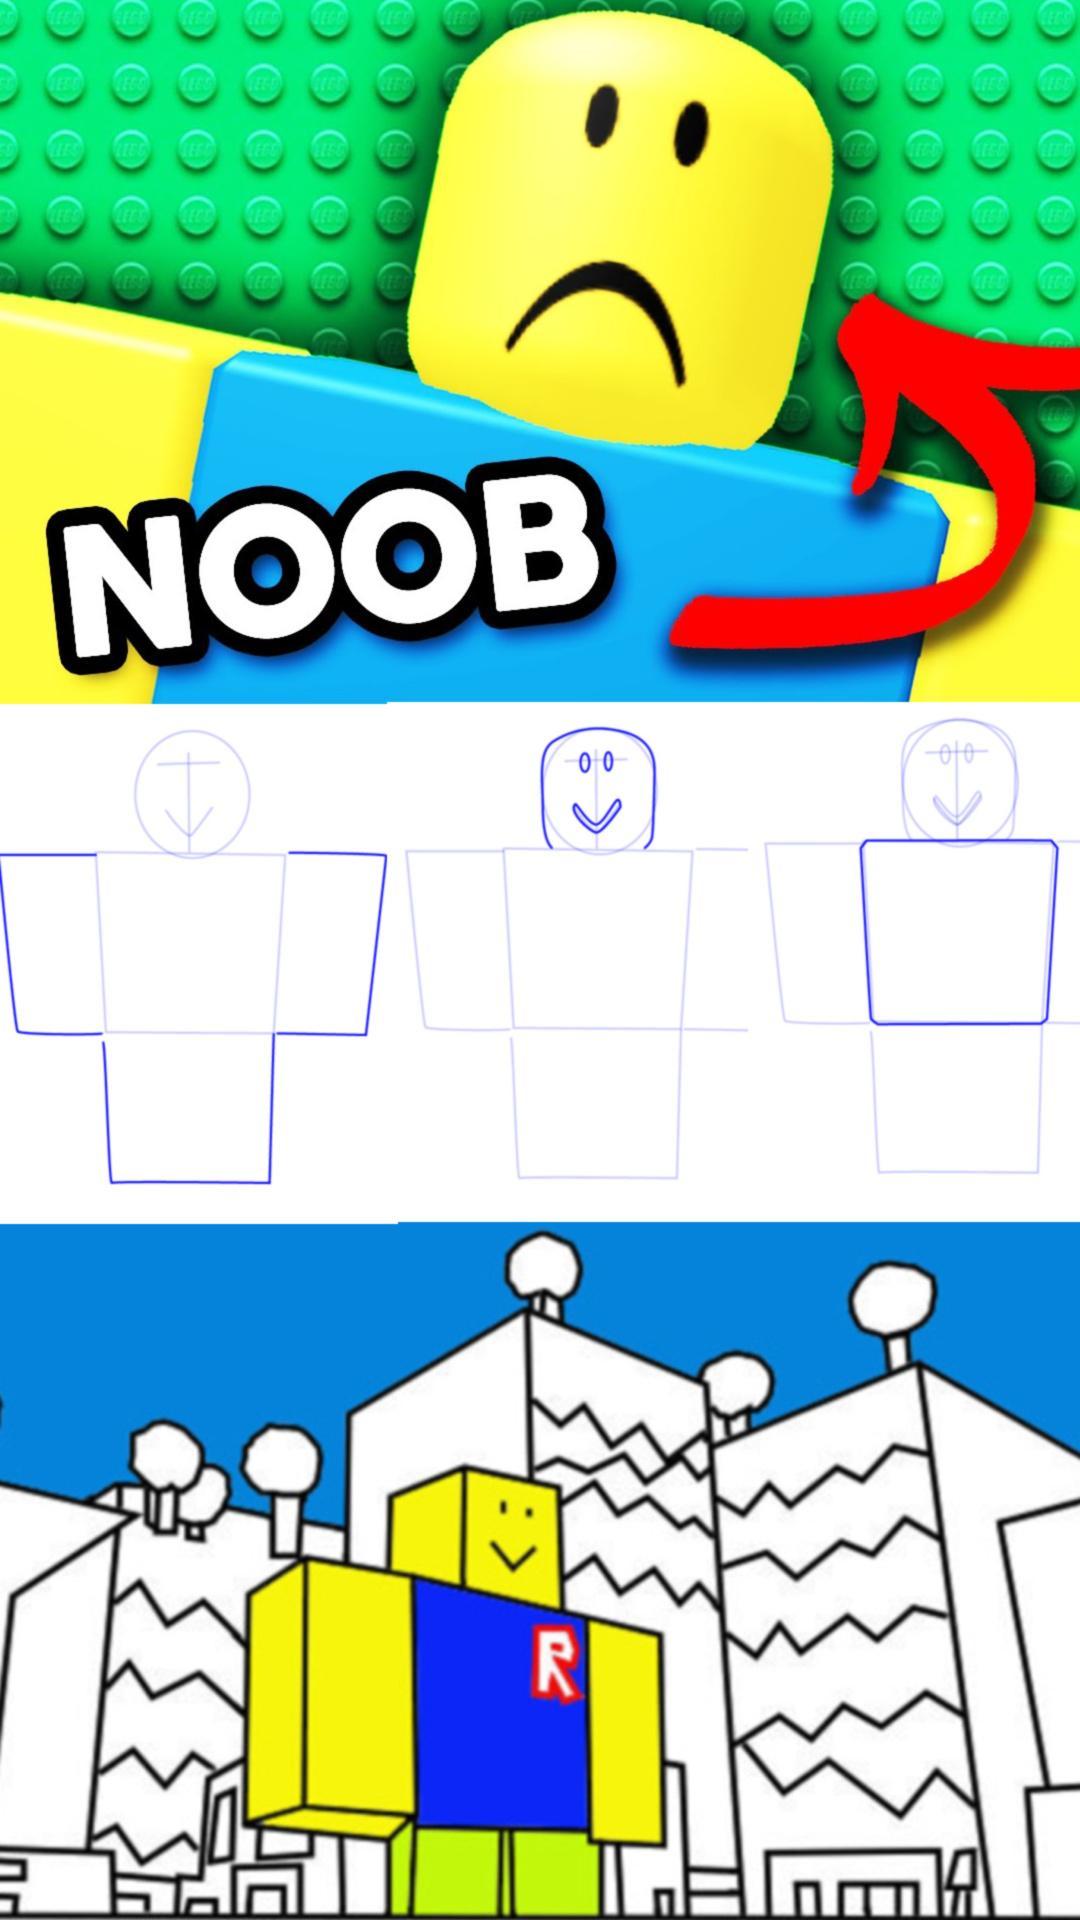 How To Draw Roblox For Android Apk Download - roblox noob picture drawing